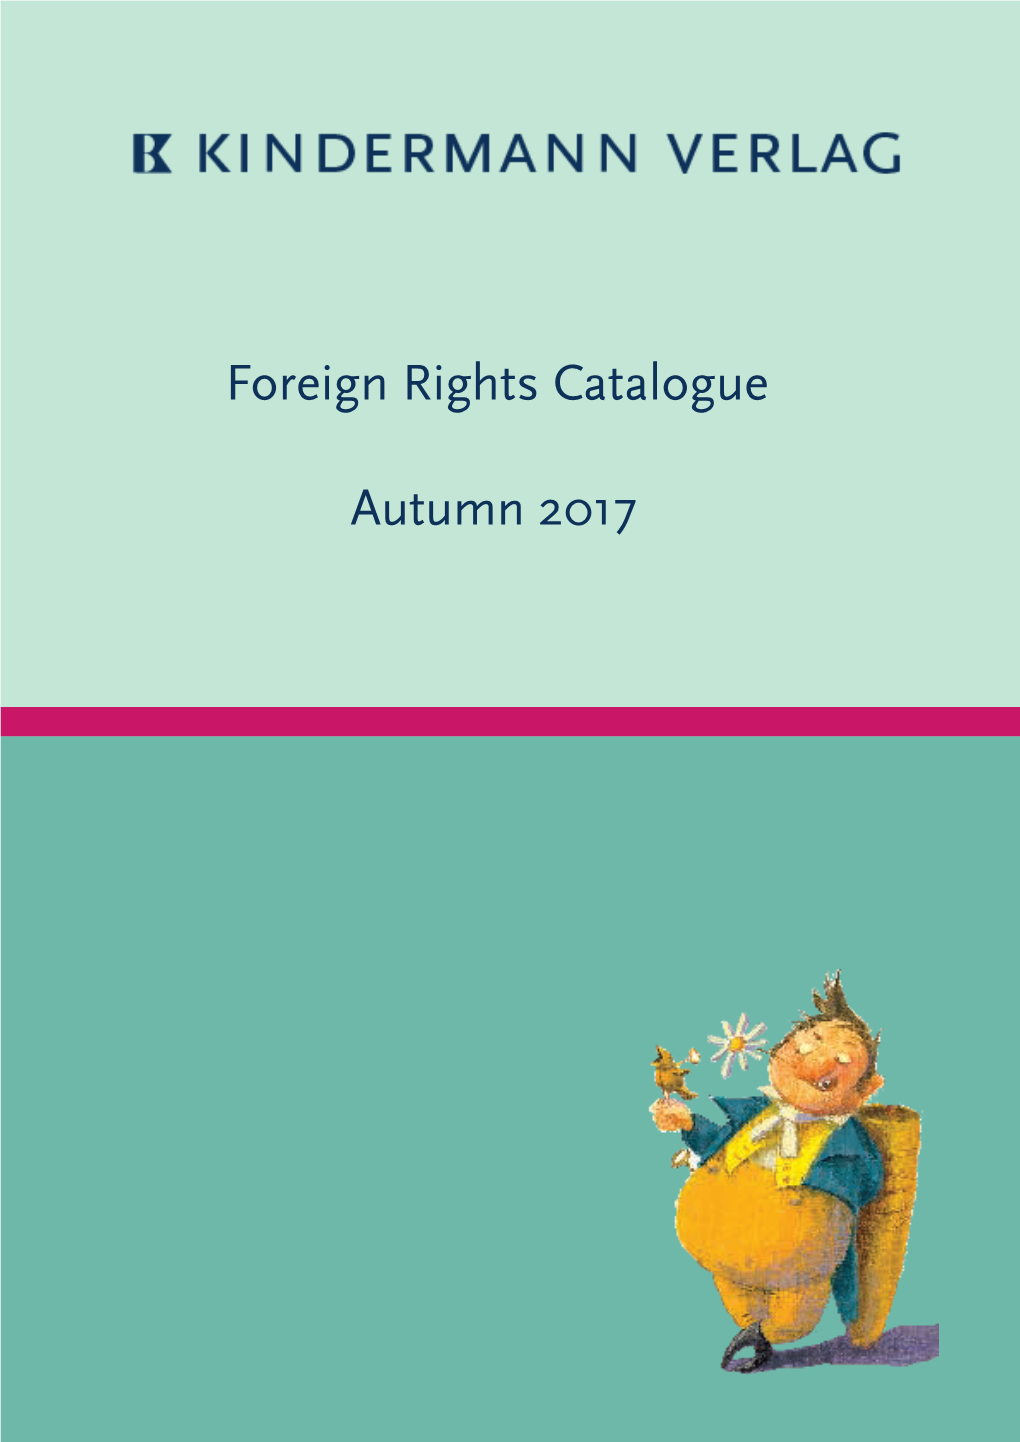 Foreign Rights Catalogue Autumn 2017